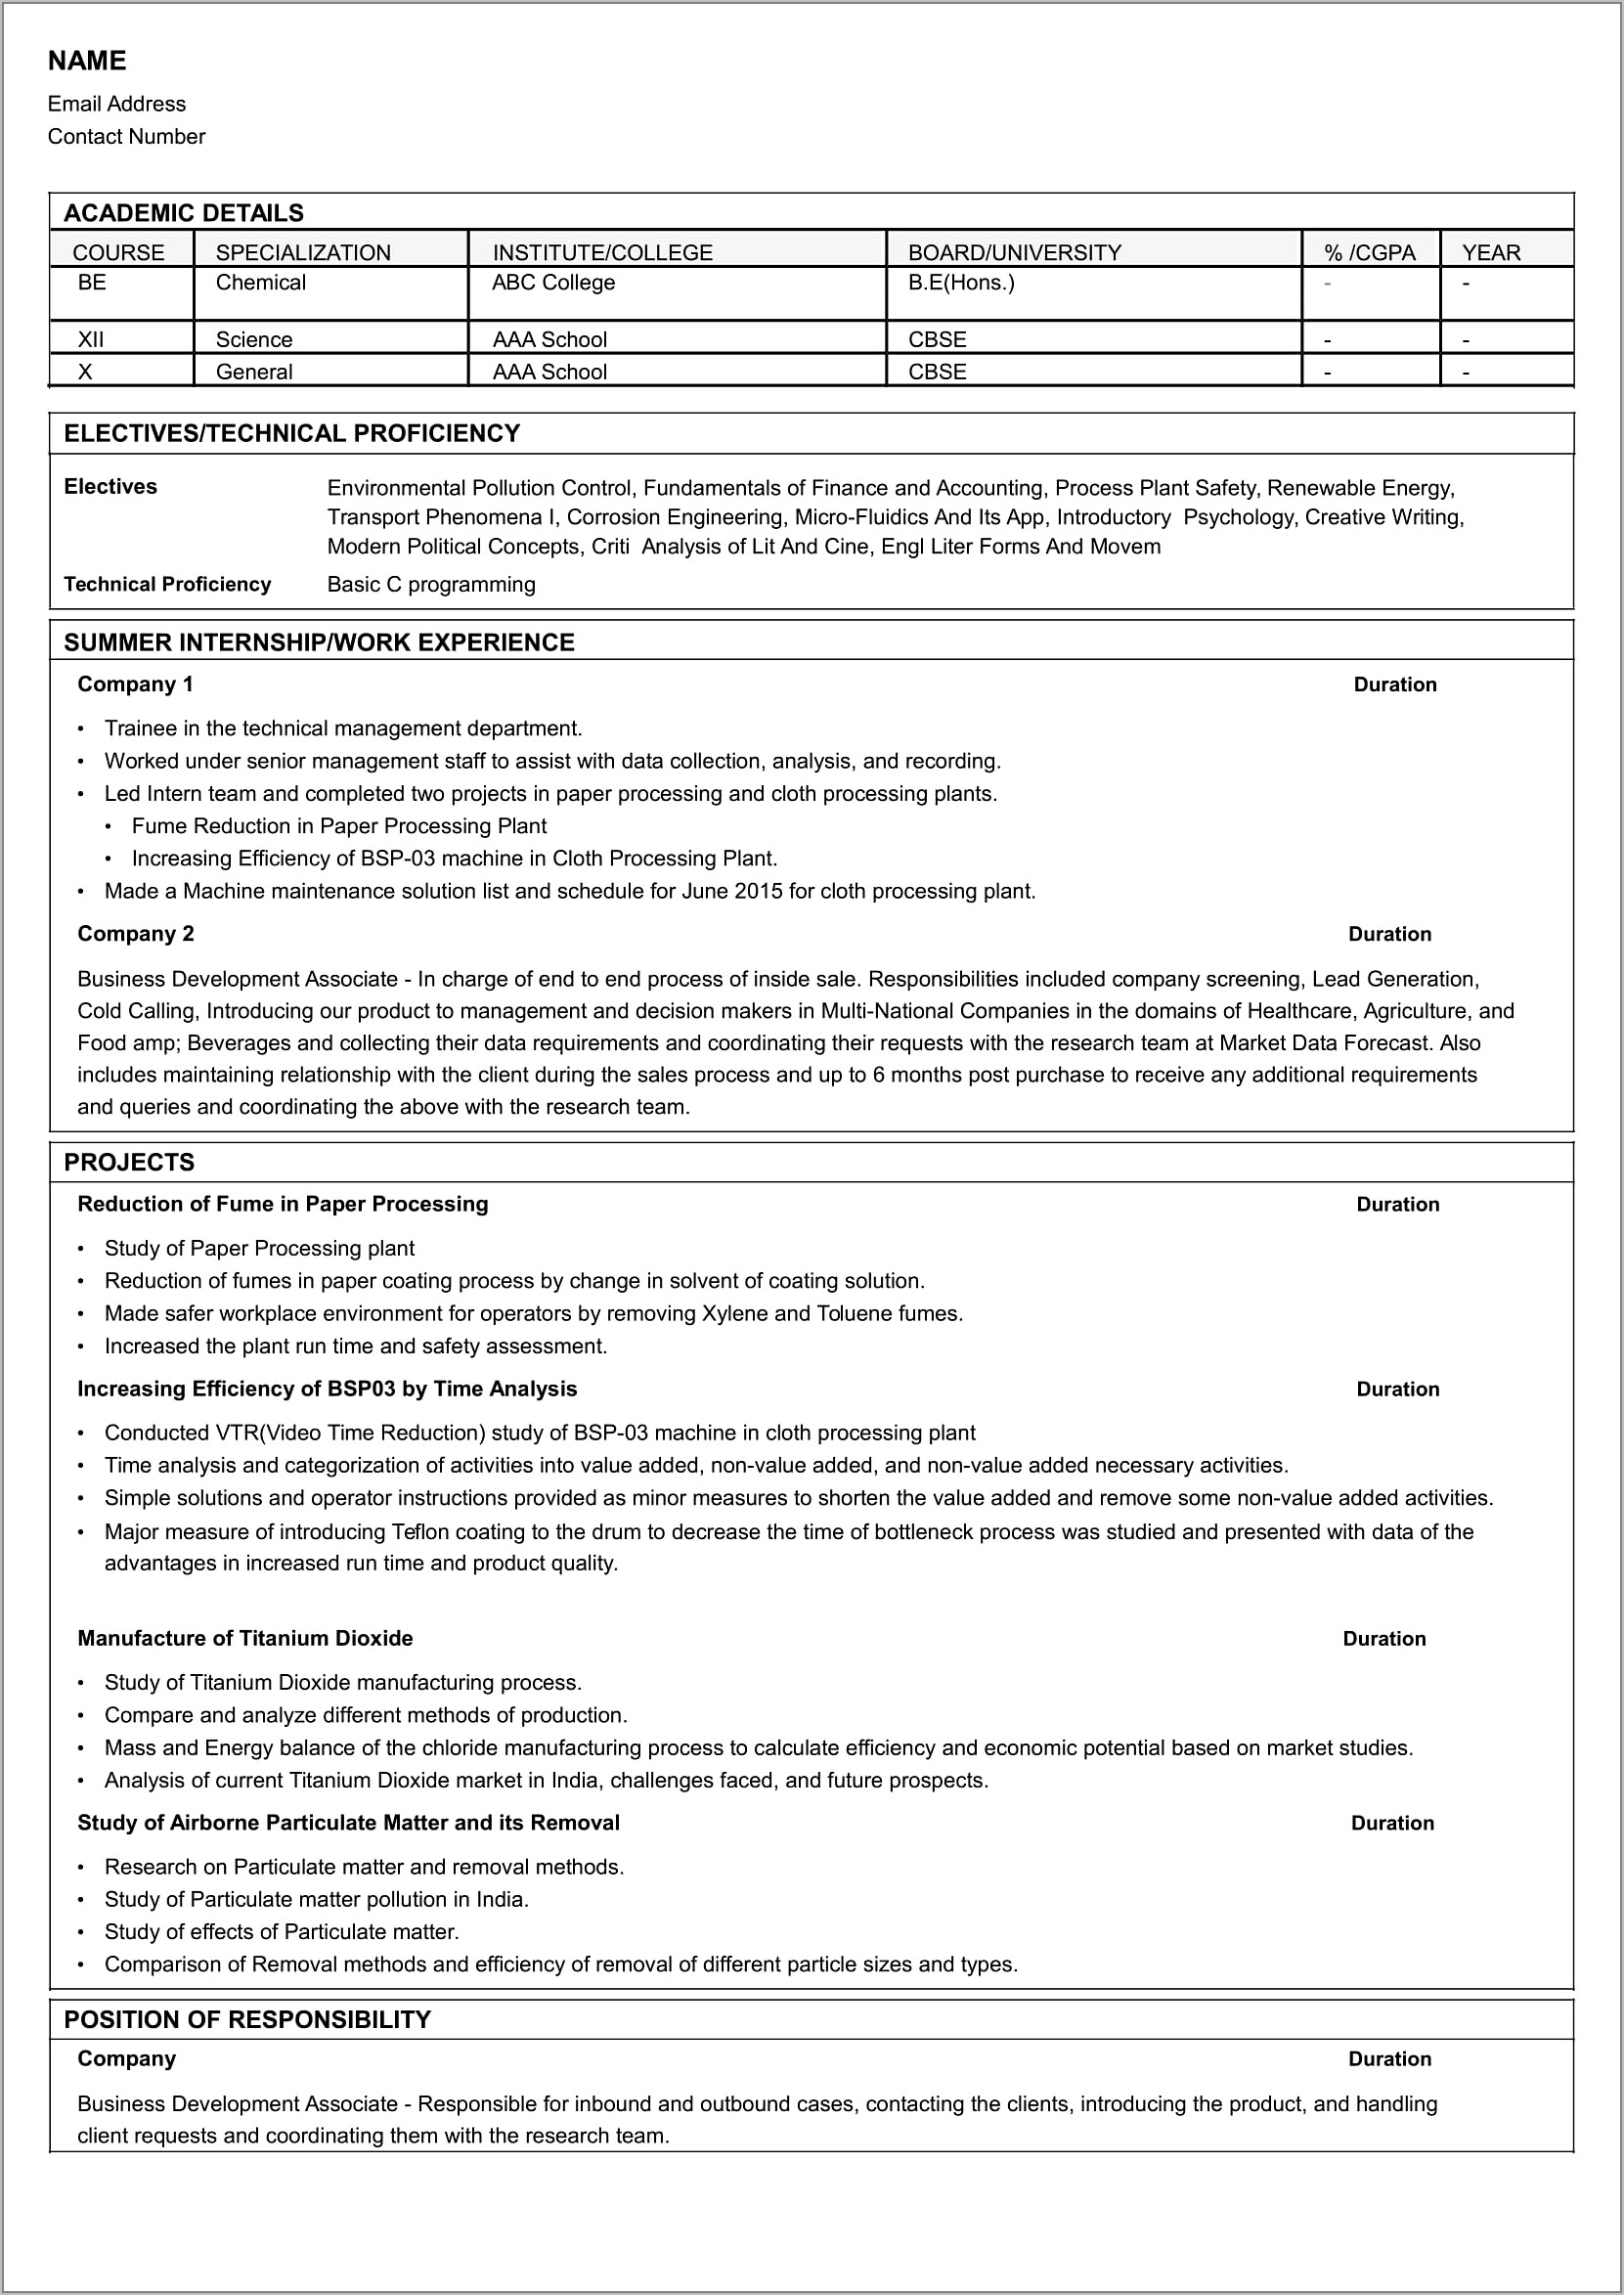 Free Resume Builder For Freshers Engineers